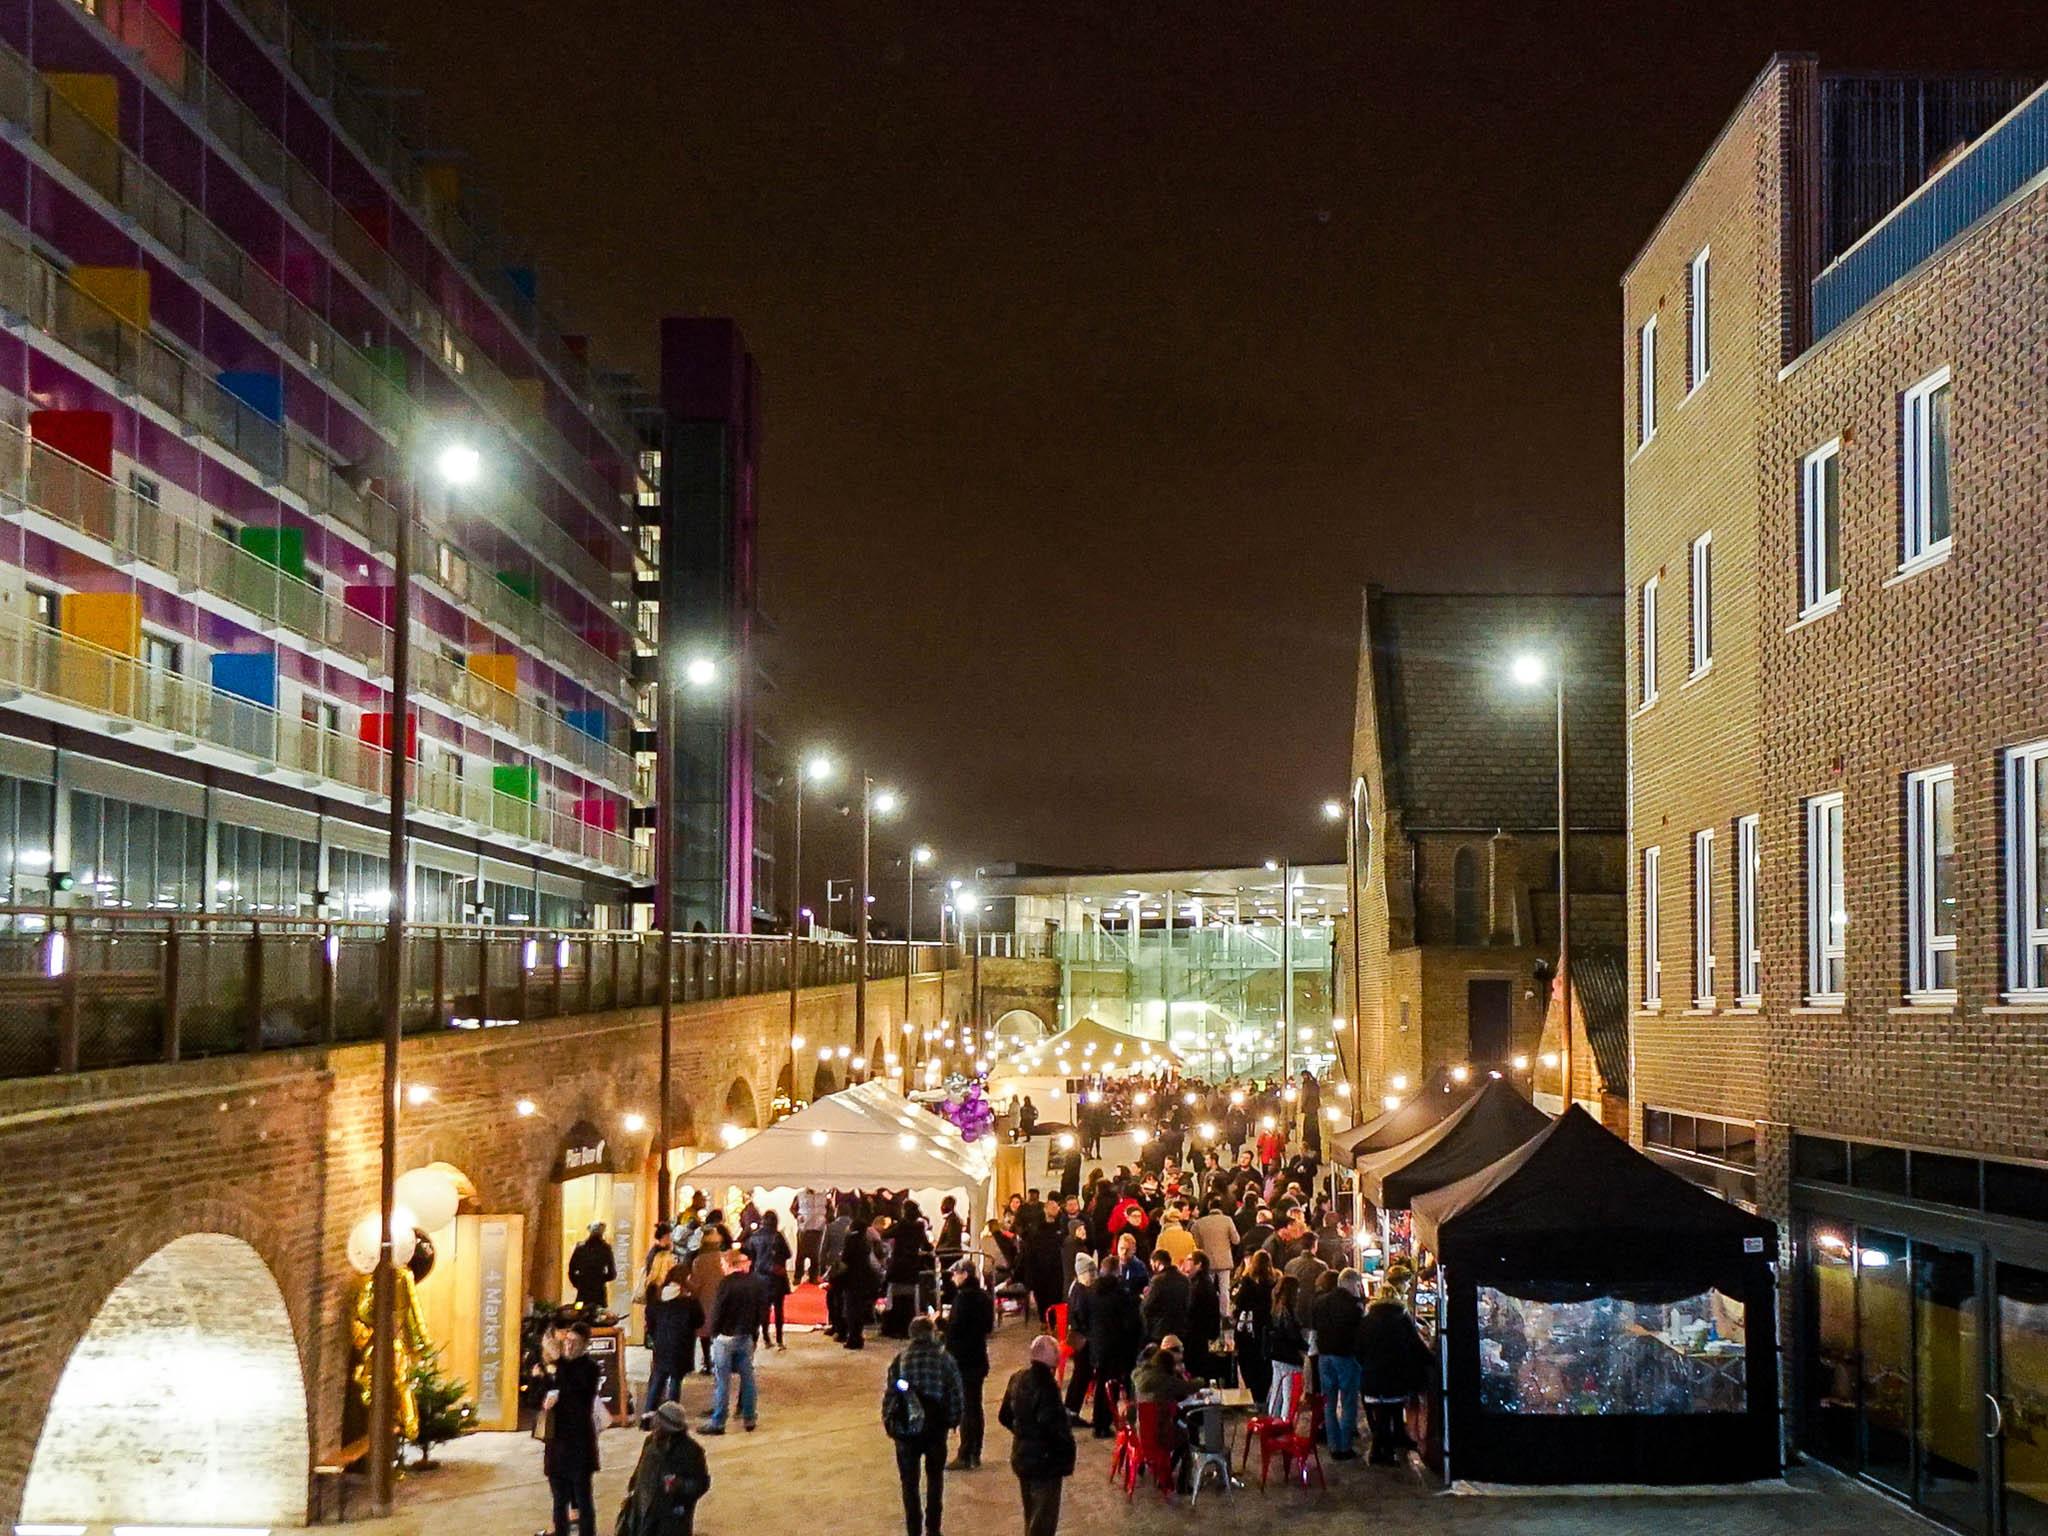 Down in Deptford: The craft beer festival is free and features many of the local breweries